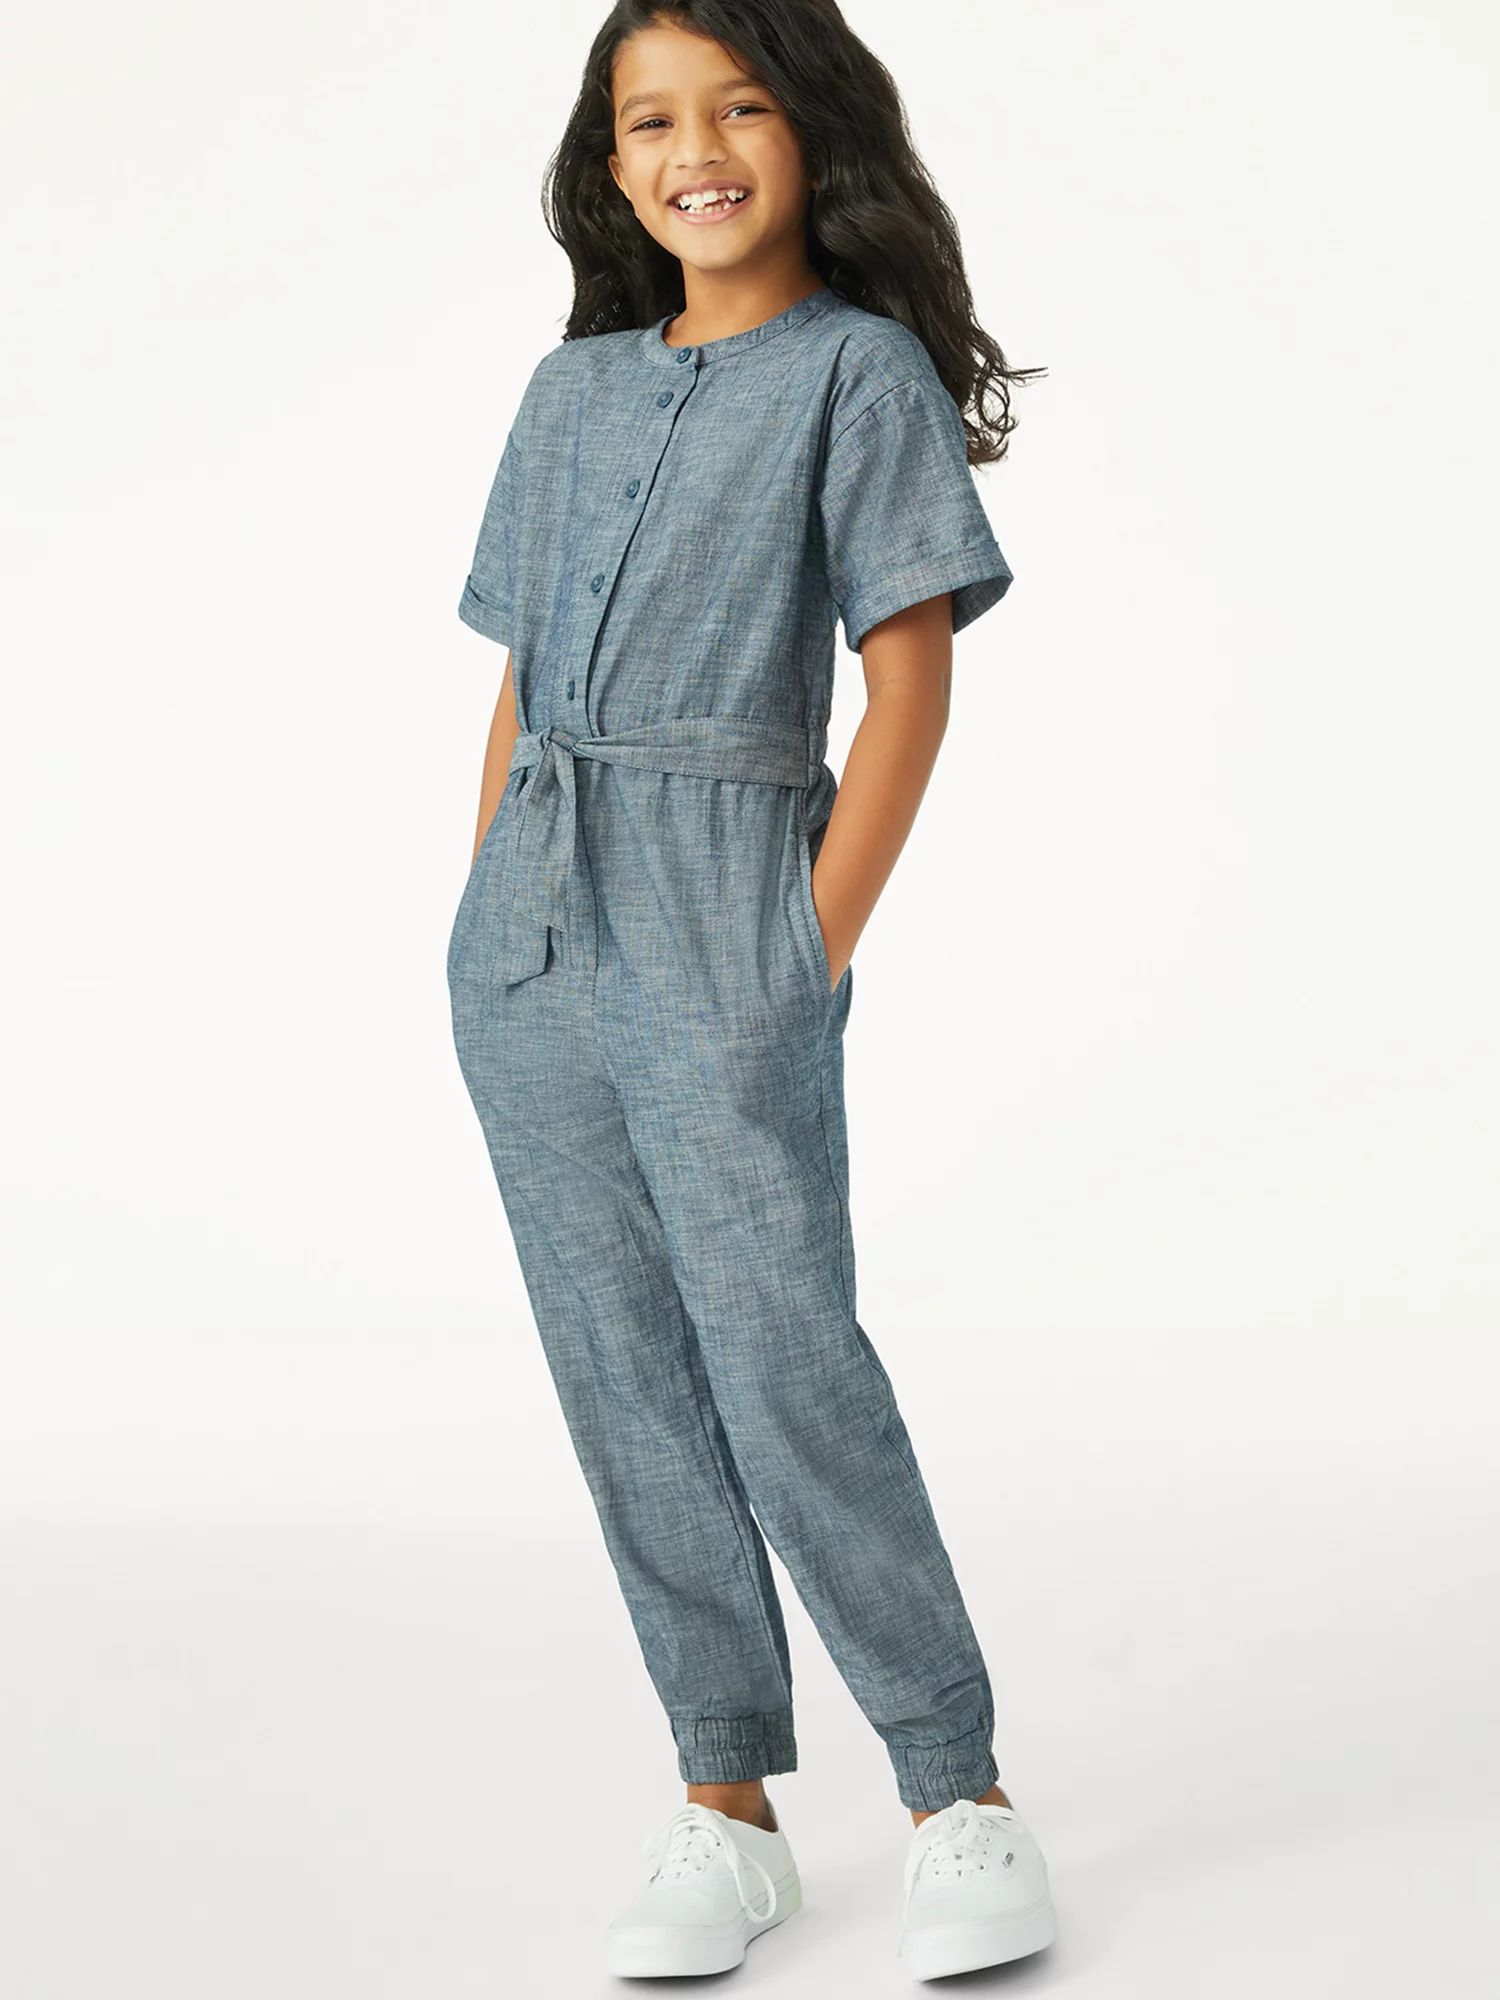 Free Assembly Girls Short Sleeve Belted Jumpsuit, Sizes 4-18 | Walmart (US)